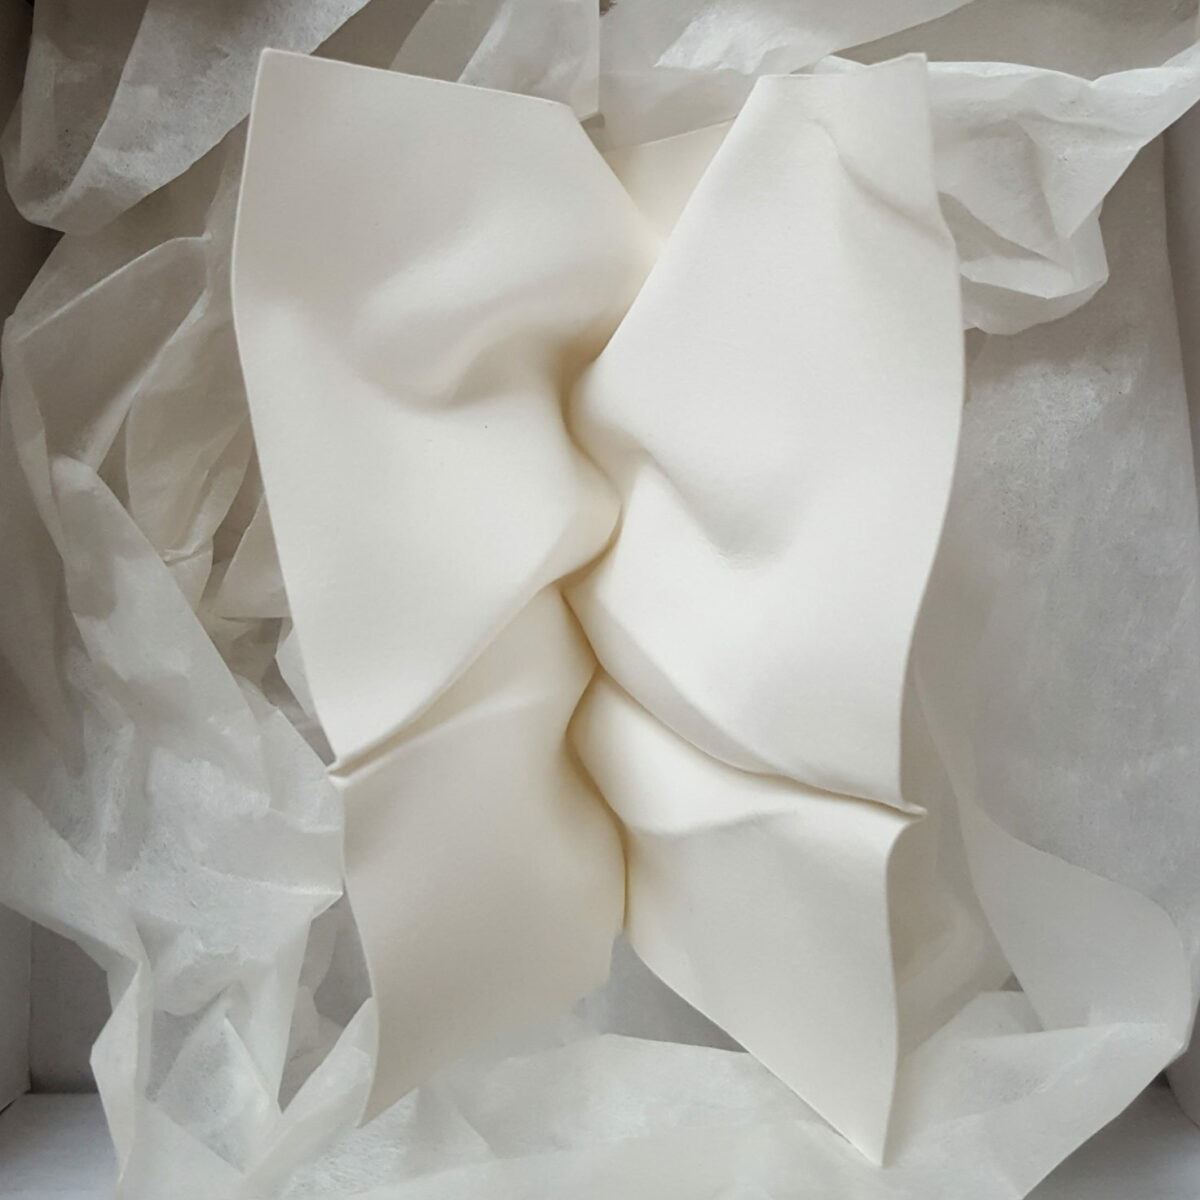 Fascinating Facial Sculptures Made From Folded Paper Sheets By Polly Verity (8)